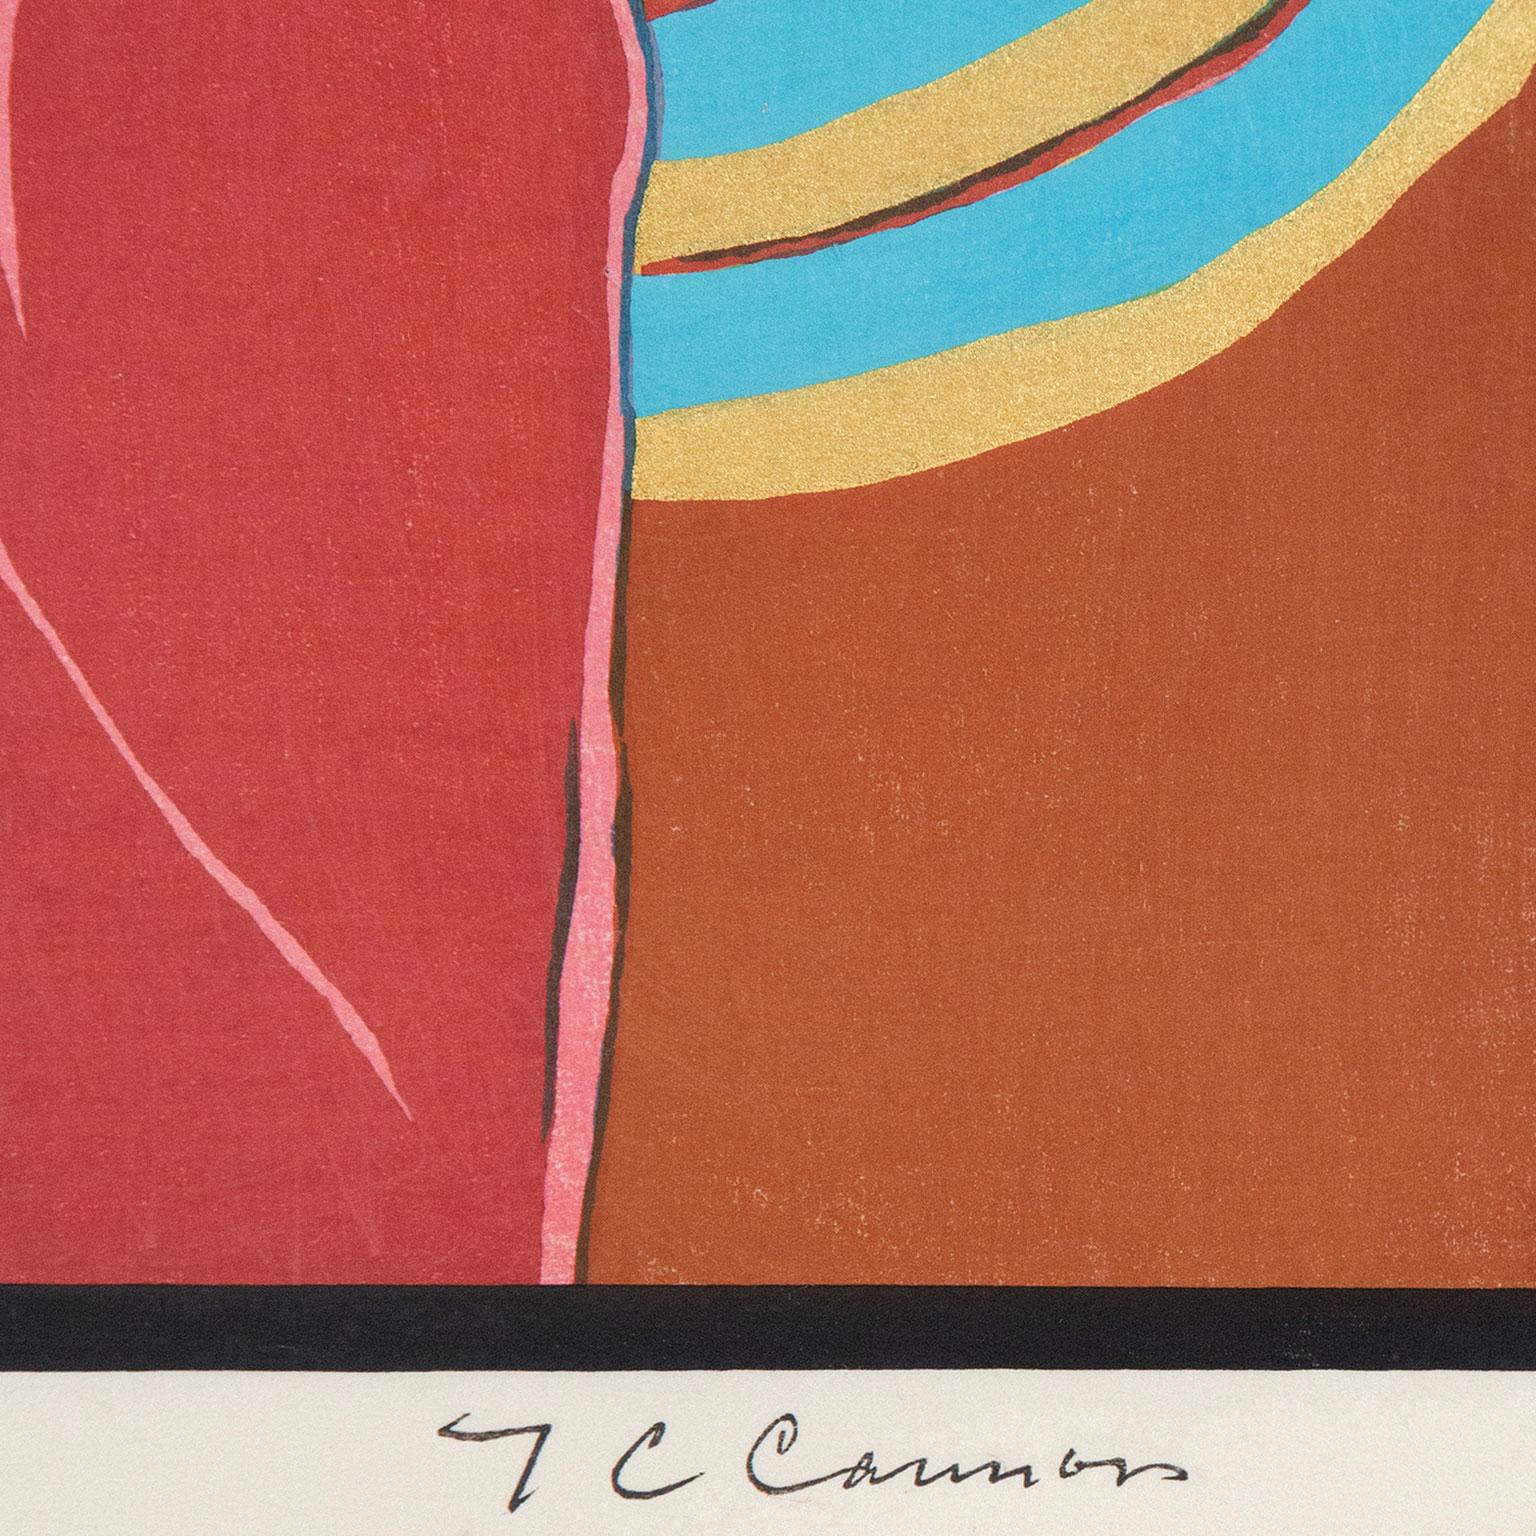 
T.C. Cannon (American, 1946–1978)
His Hair Flows like a River
Woodcut
Edition: 200
22 x 17 in. (55.9 x 43.2 cm.)
Signed and numbered, lower margin